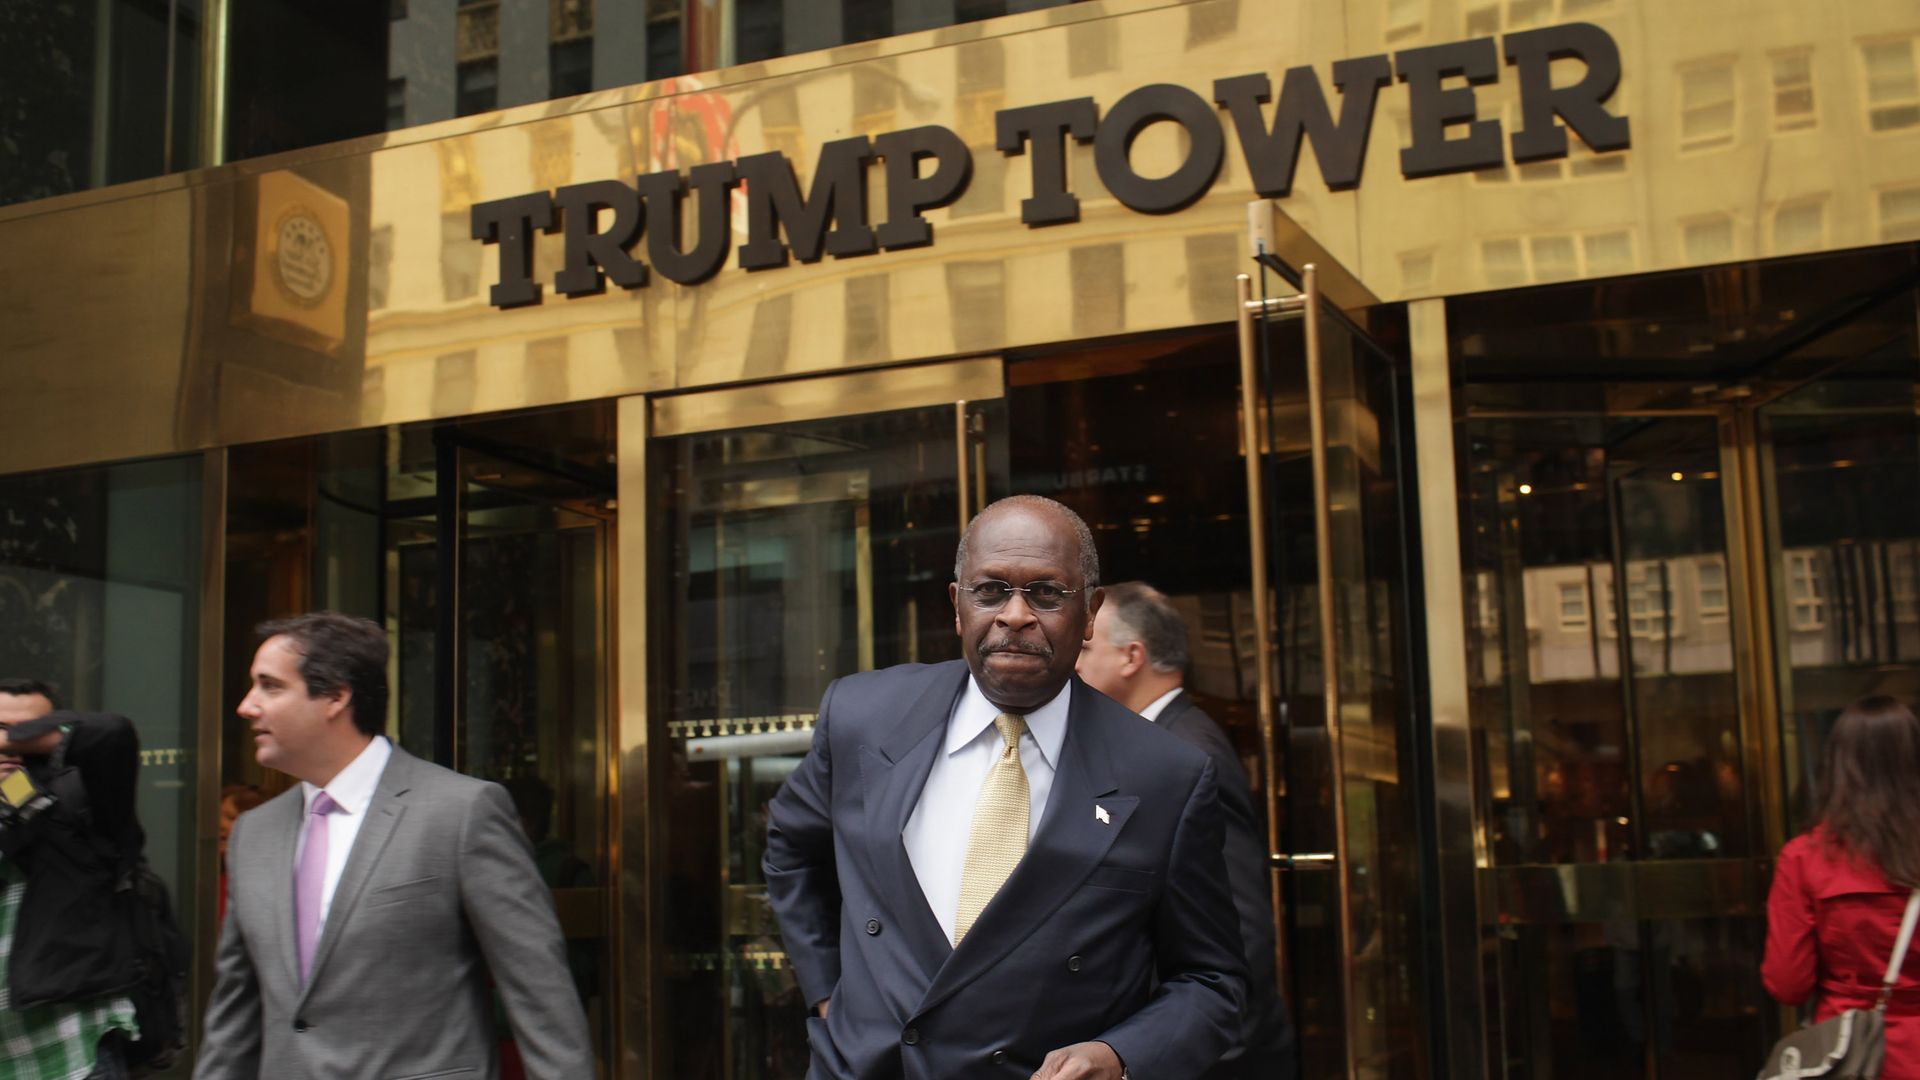 In this image, Herman Cain walks out of Trump Tower in a suit. 